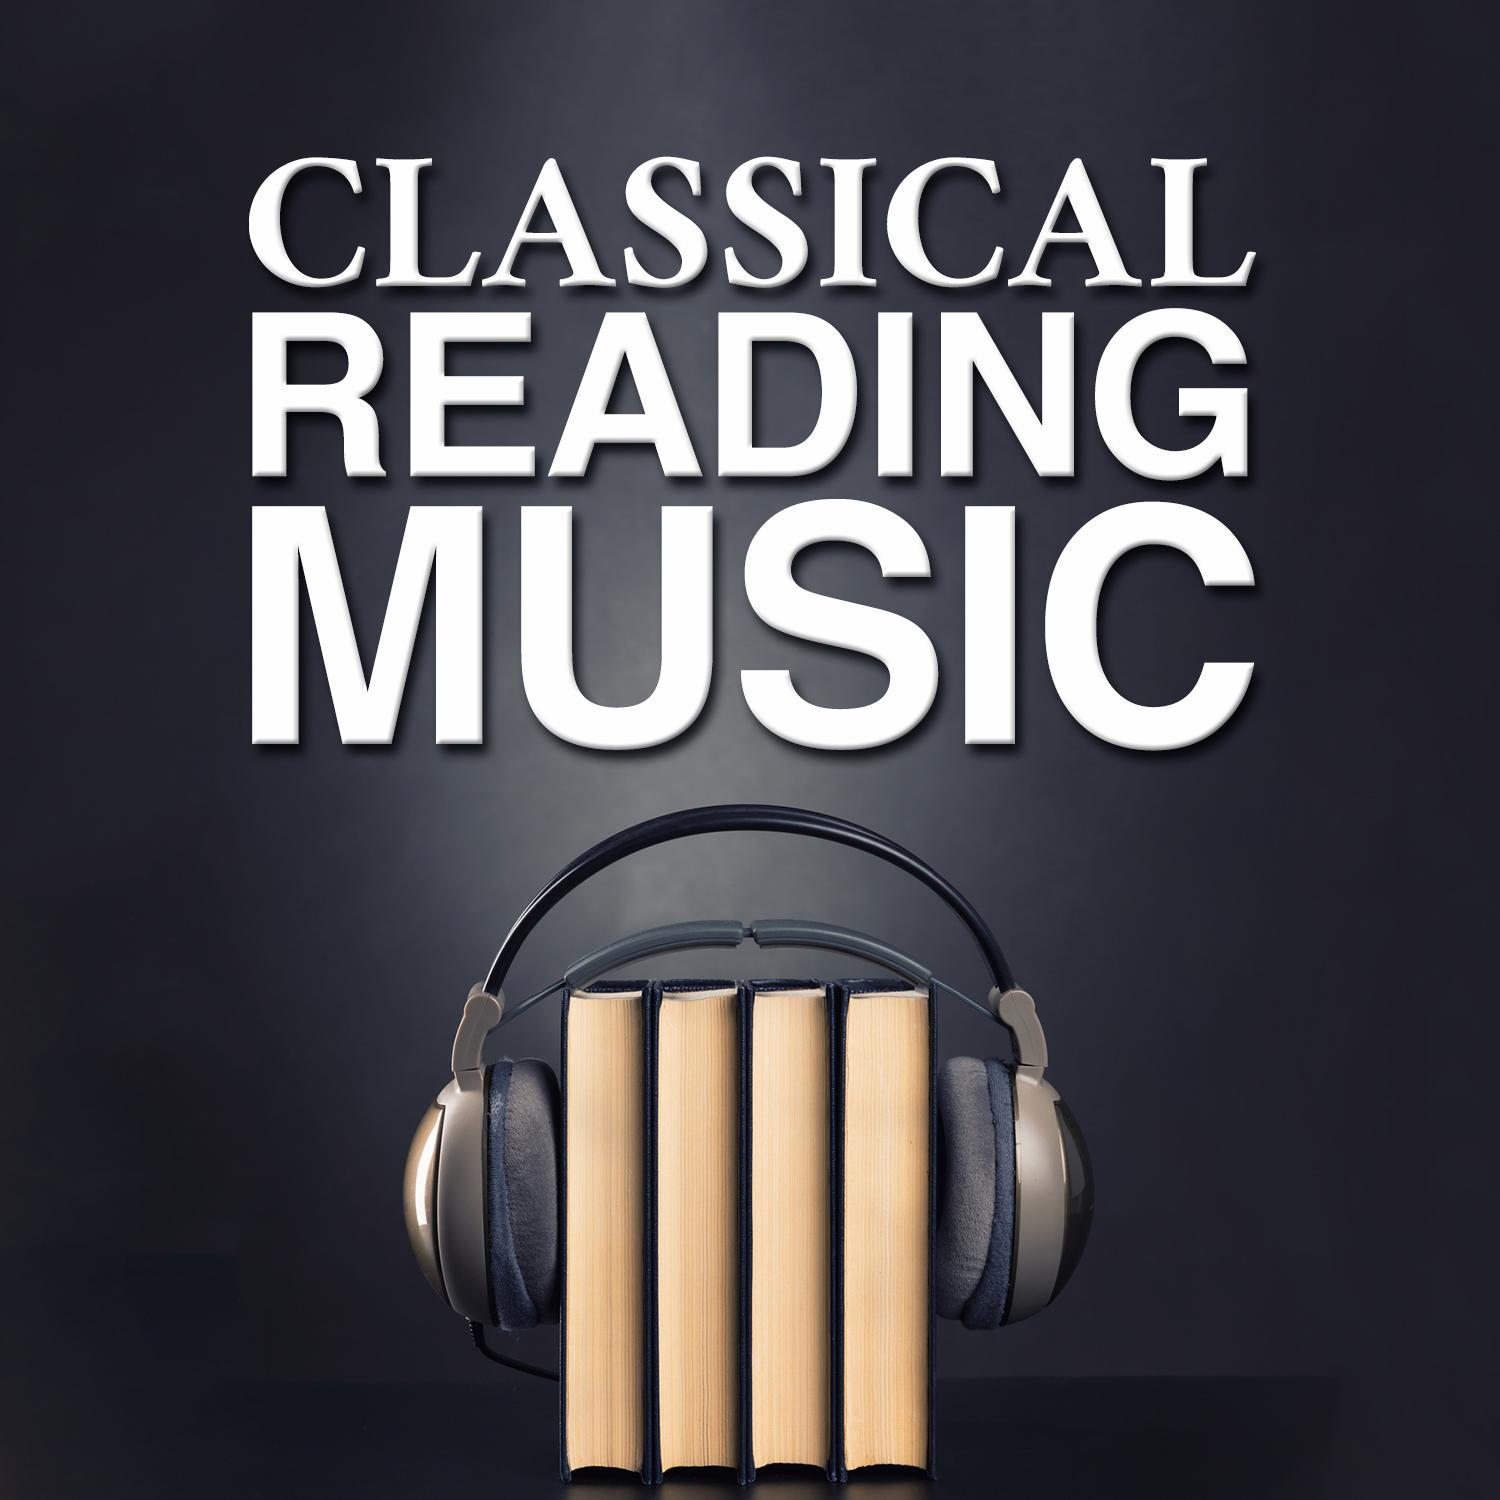 Classical Reading Music